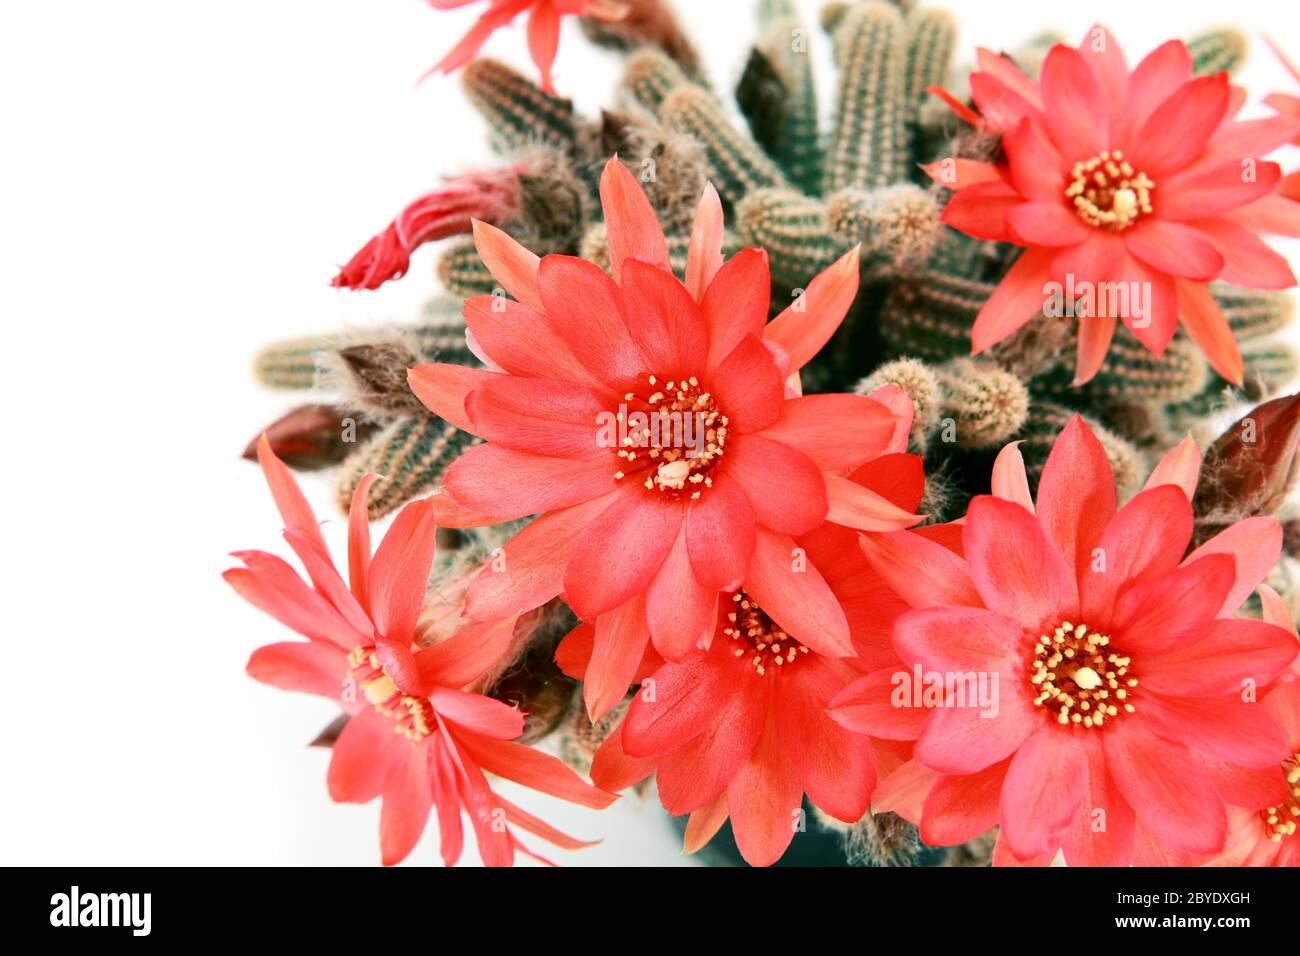 many red cactus flowers over white Stock Photo